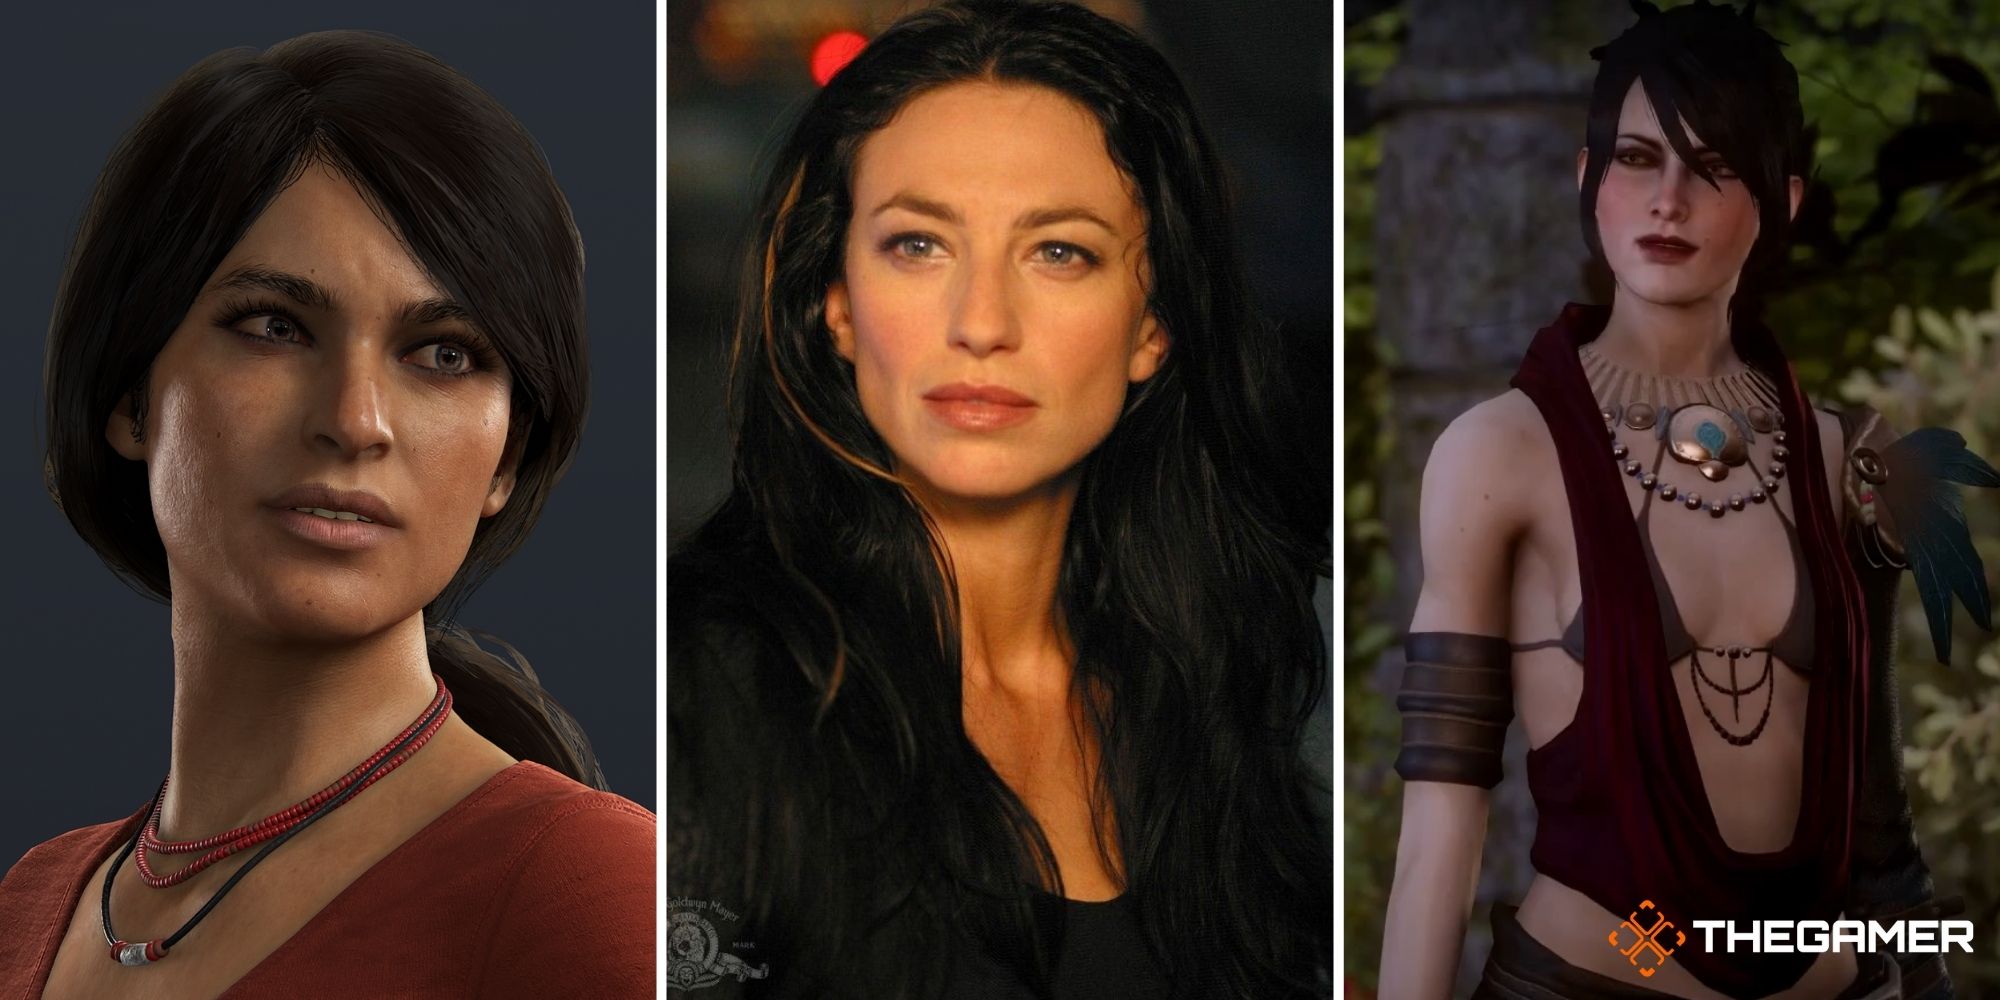 Claudia Black voice actress for roles of Chloe Frazer from Uncharted series and Morrigan from Dragon Age series